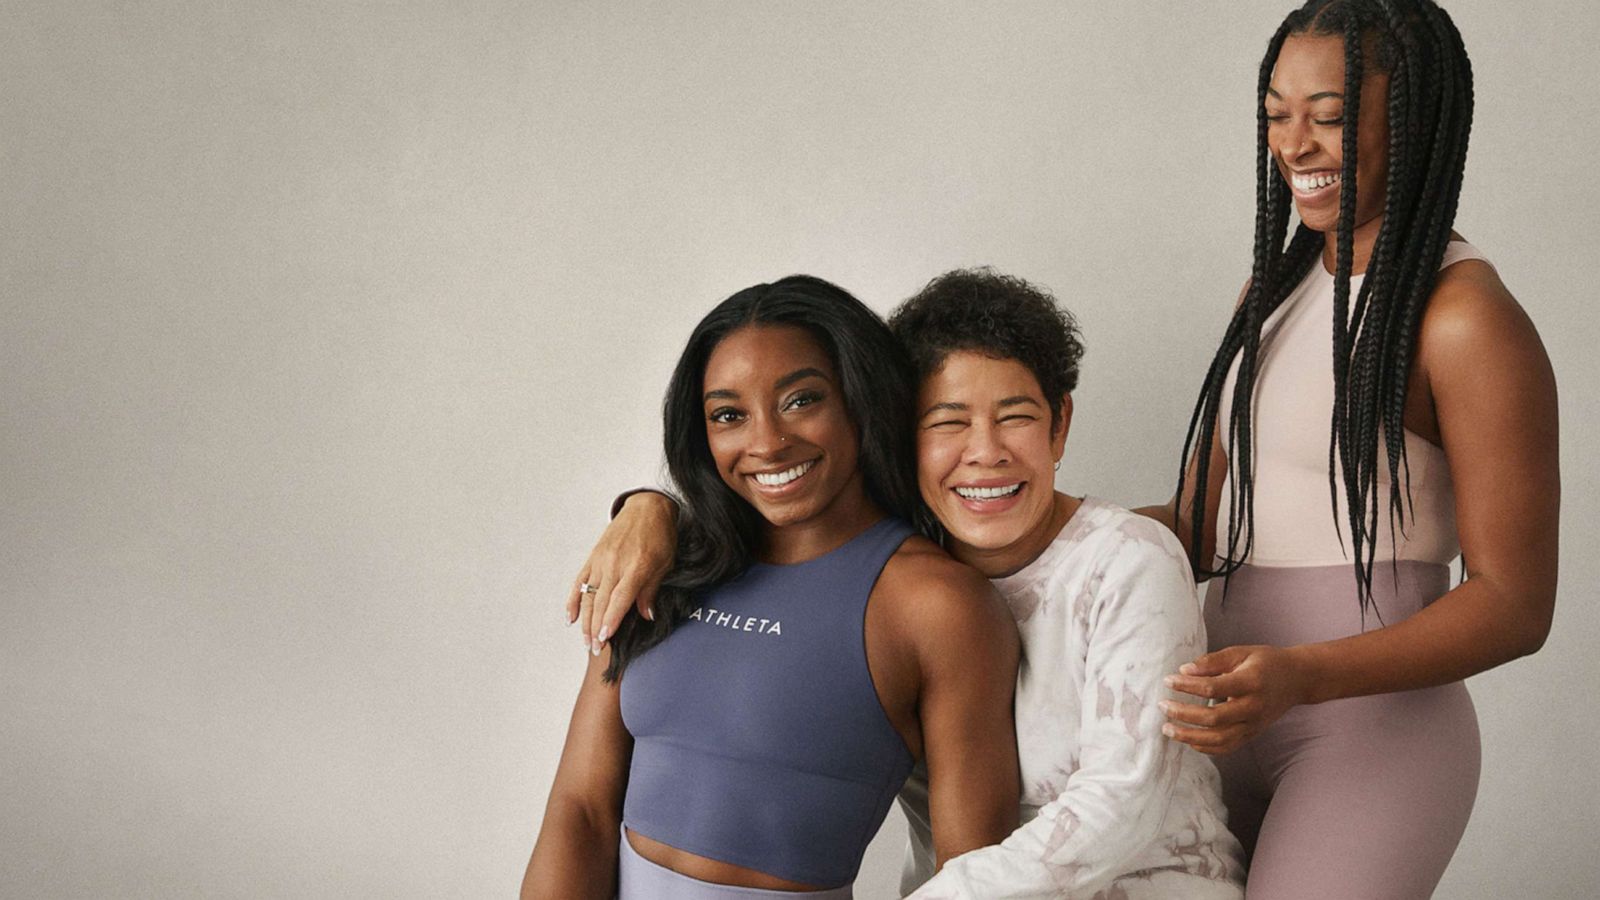 Simone Biles poses with mom, sister for Athleta 'Power of We' campaign -  Good Morning America